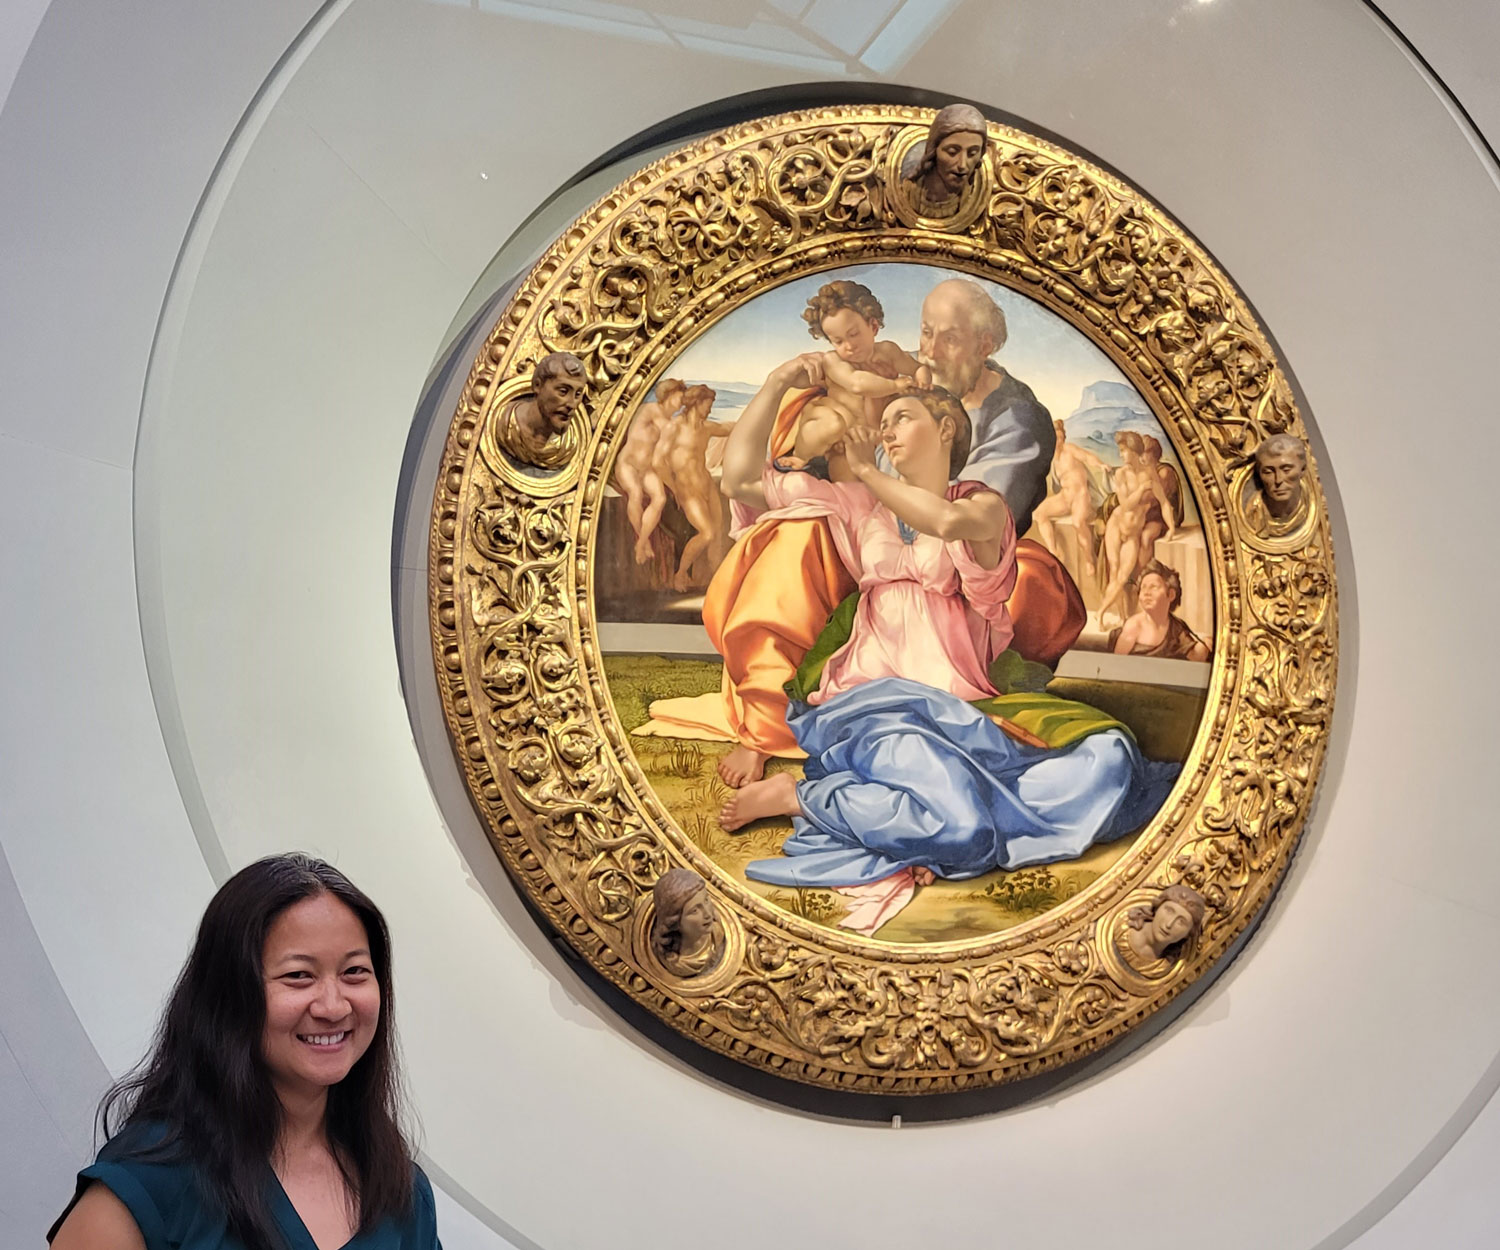 A teacher stands for a picture in front of Michelangelo’s “Doni Tondo,” in the world-renowned Uffizi gallery.